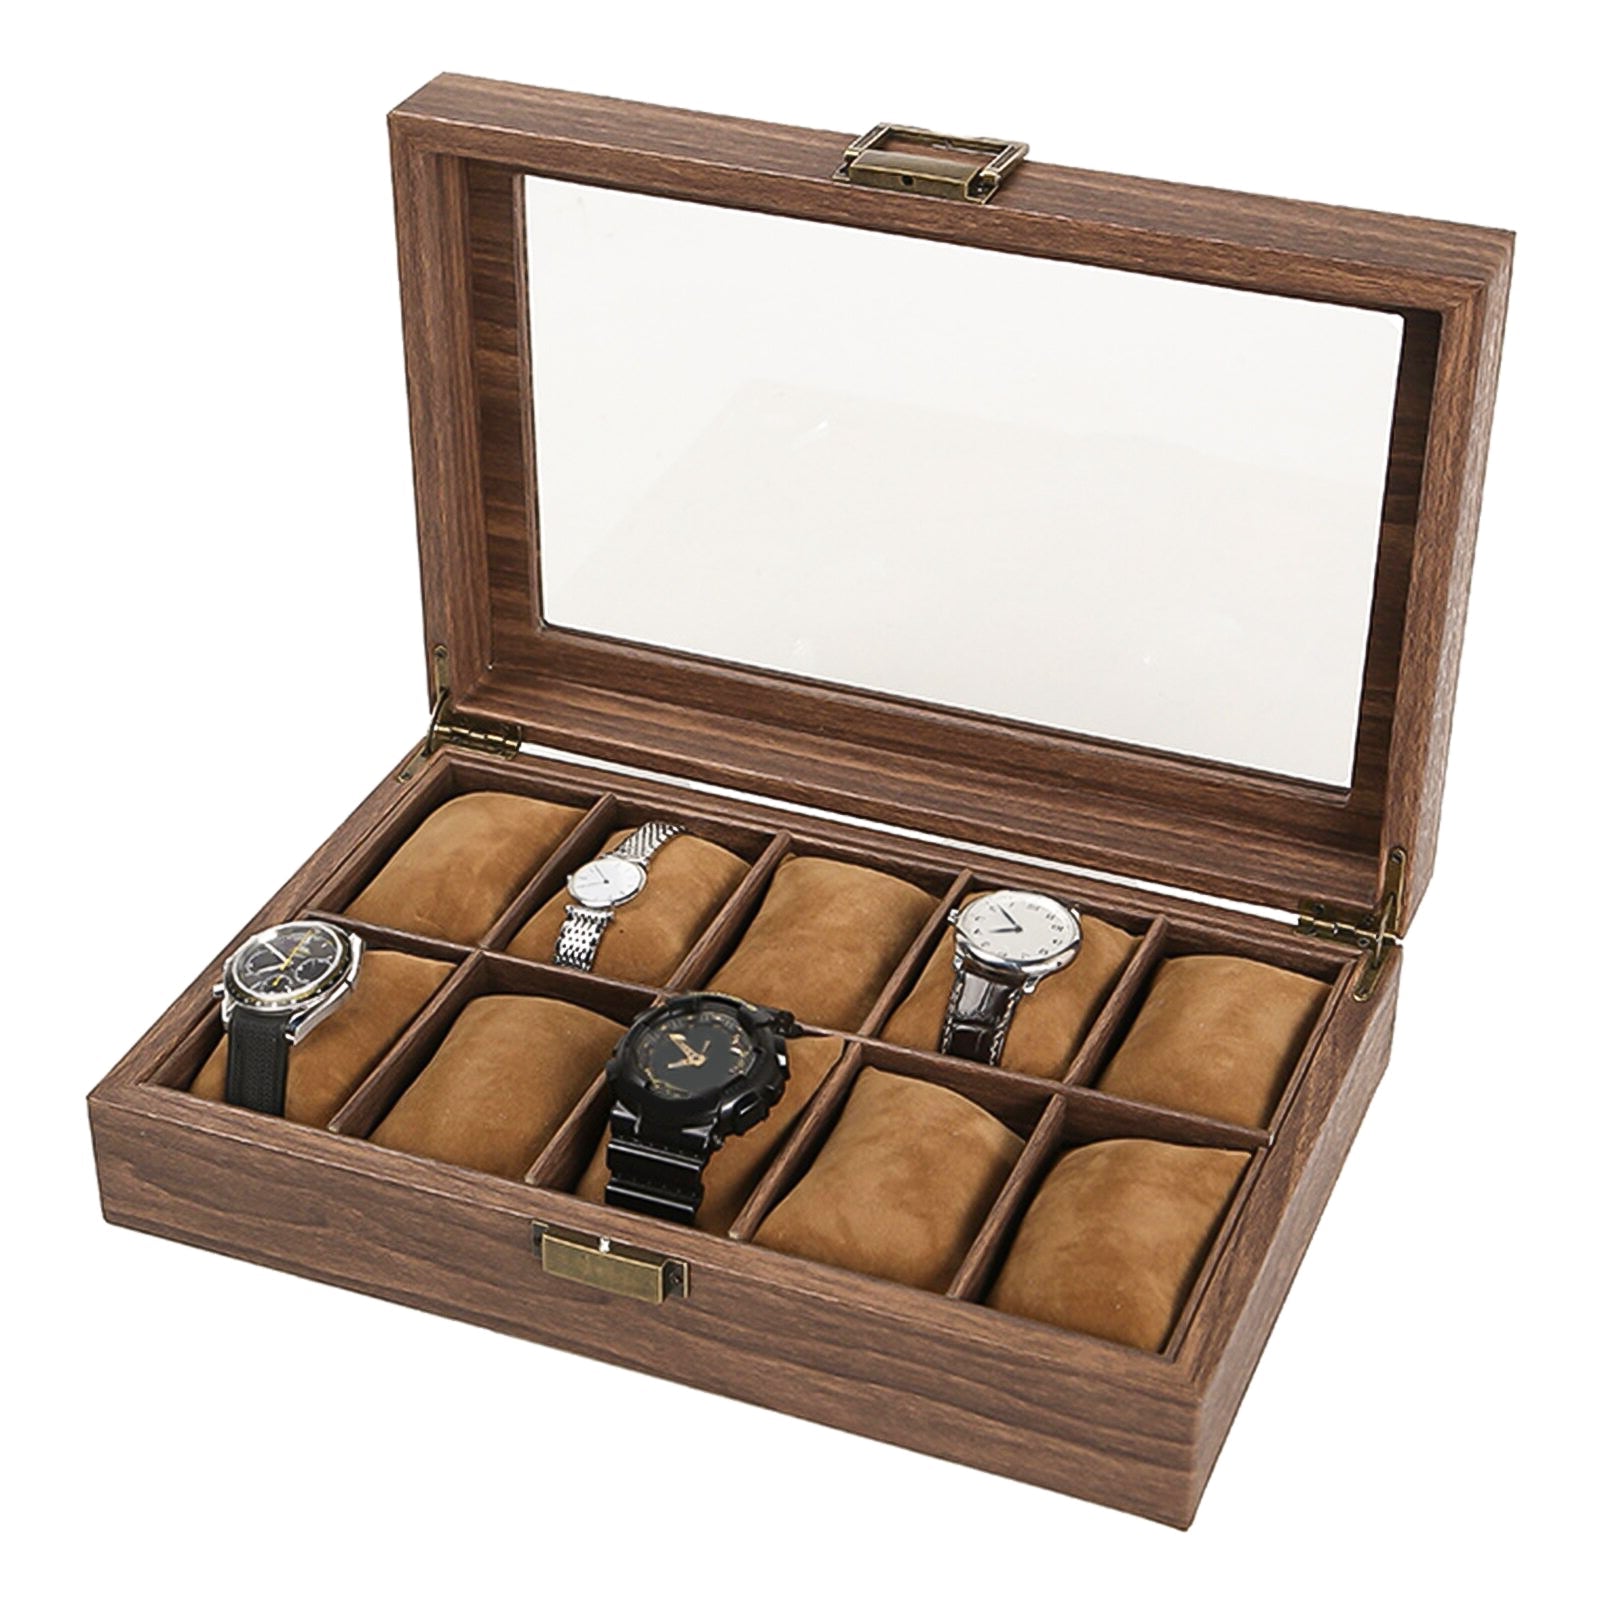 Rustic Virtuous Green Watch Box